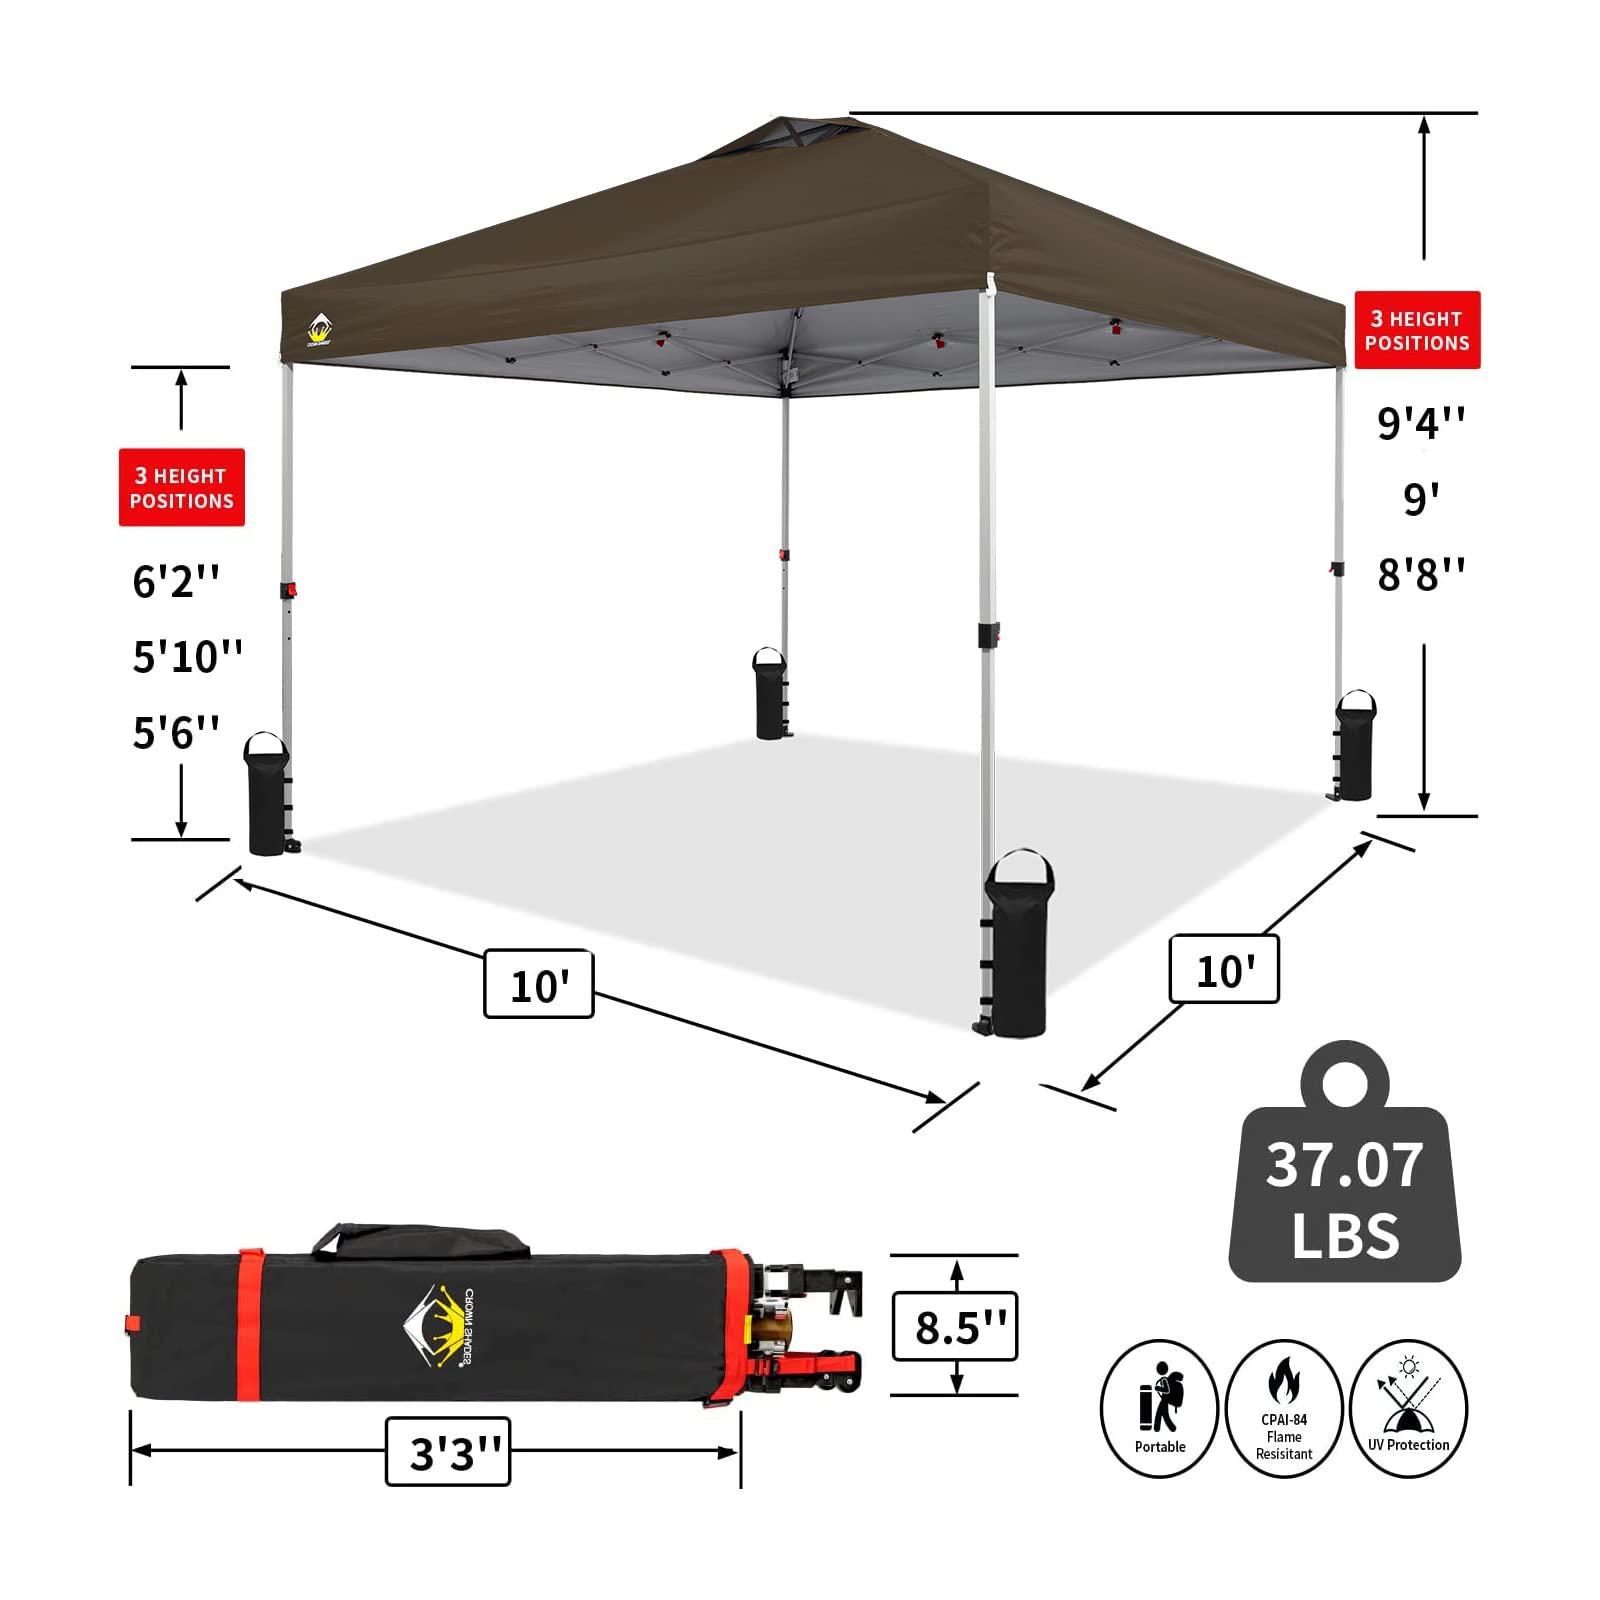 crown shades 10x10 pop up canopy outside canopy, patented one push tent canopy with wheeled carry bag, bonus 8 stakes and 4 r